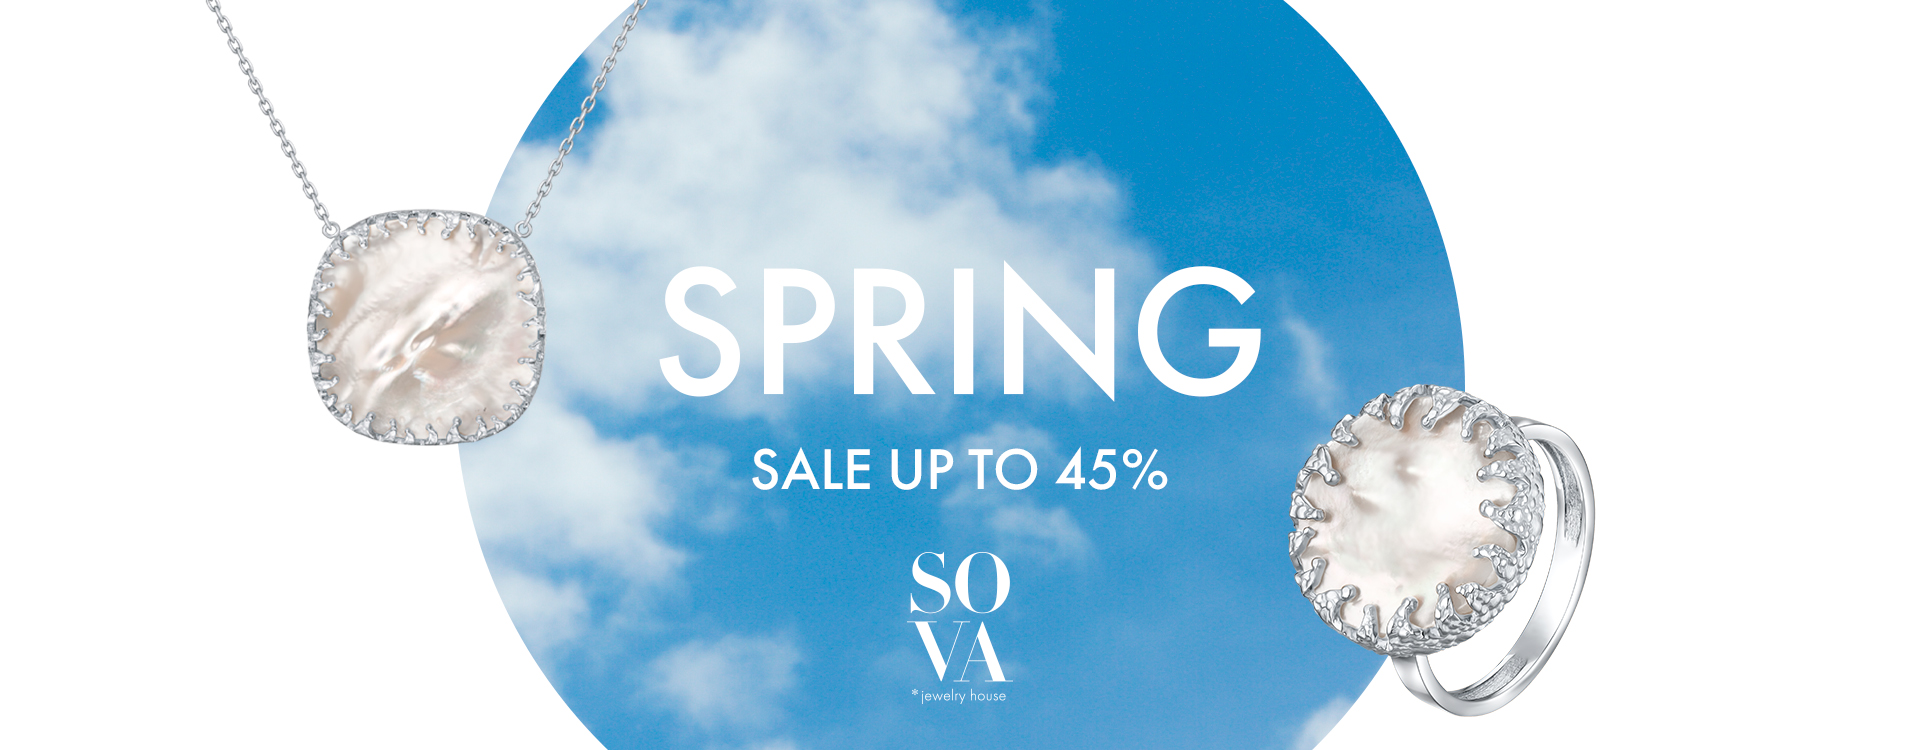 SPRING SALE up to 45% in SOVA